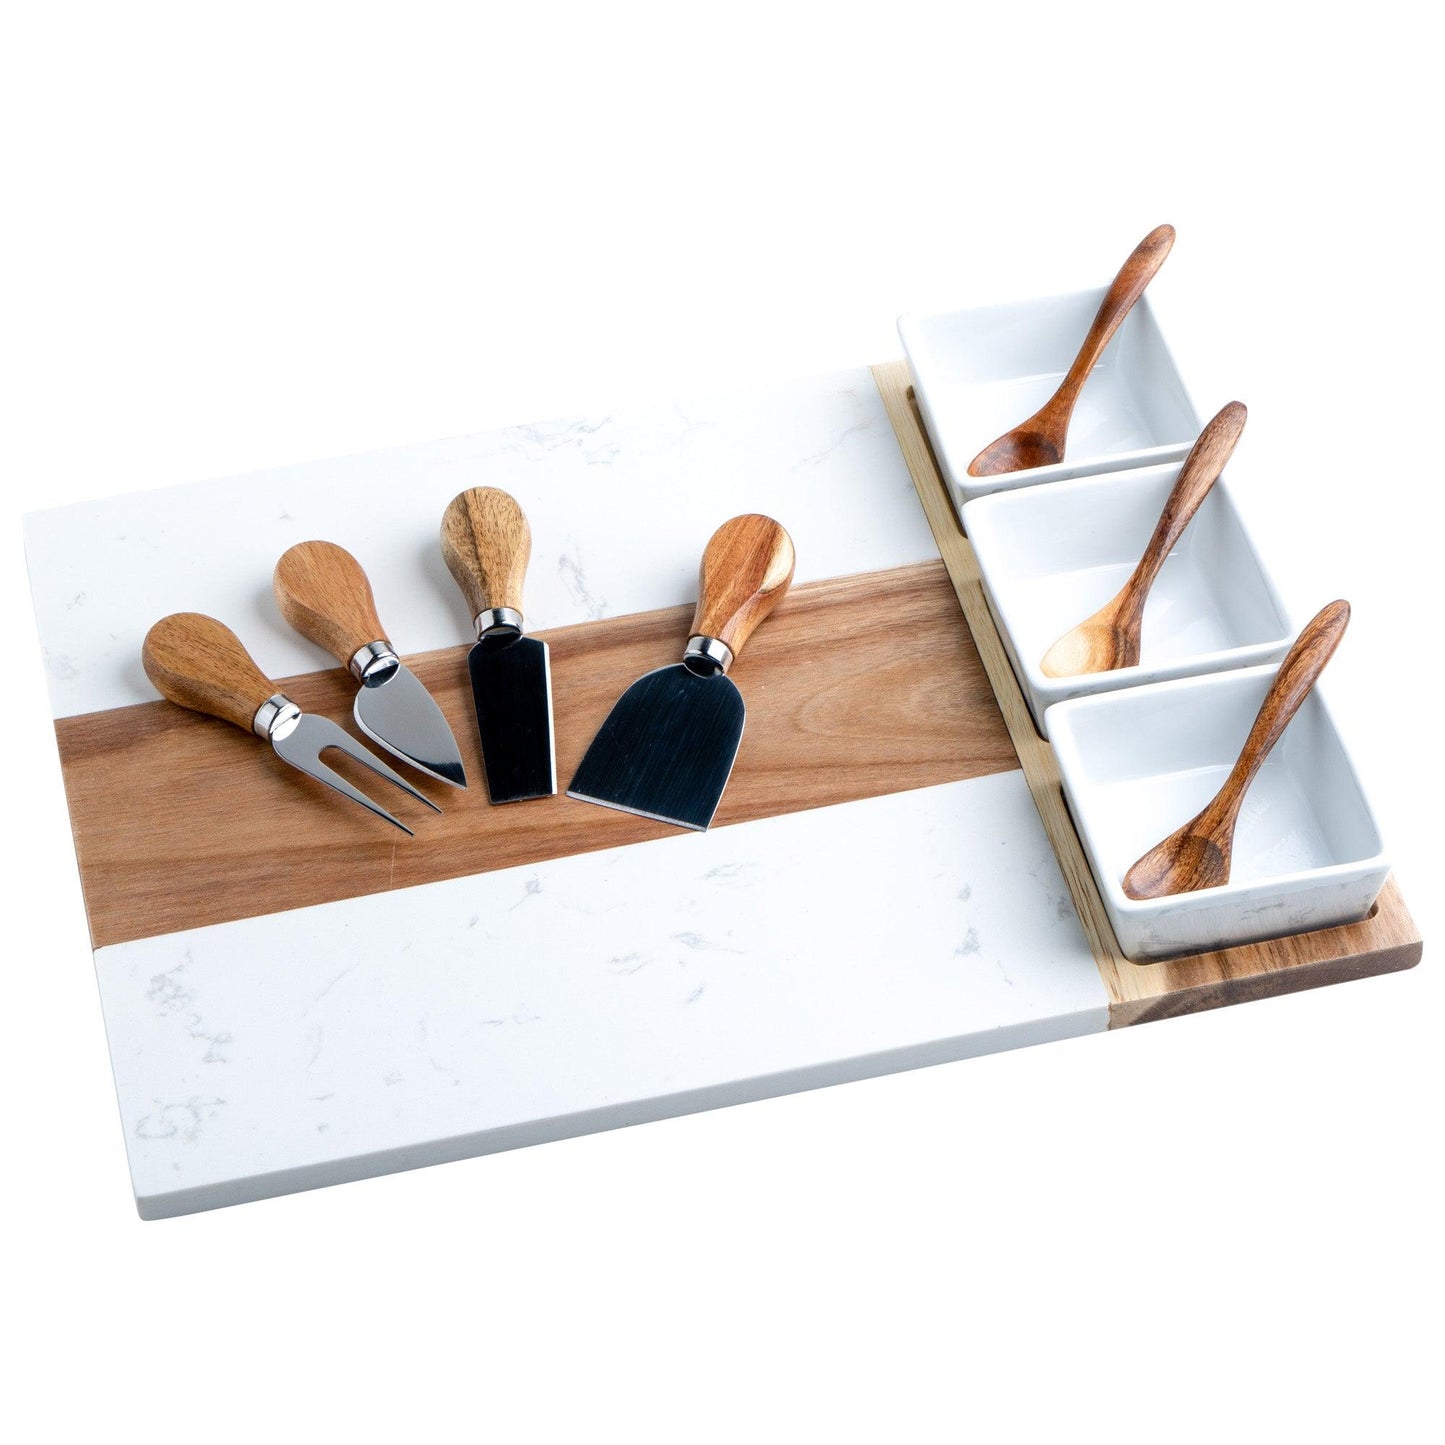 Marble and Acacia Charcuterie Board Set with Cheese Knives, Size: 15 x 8